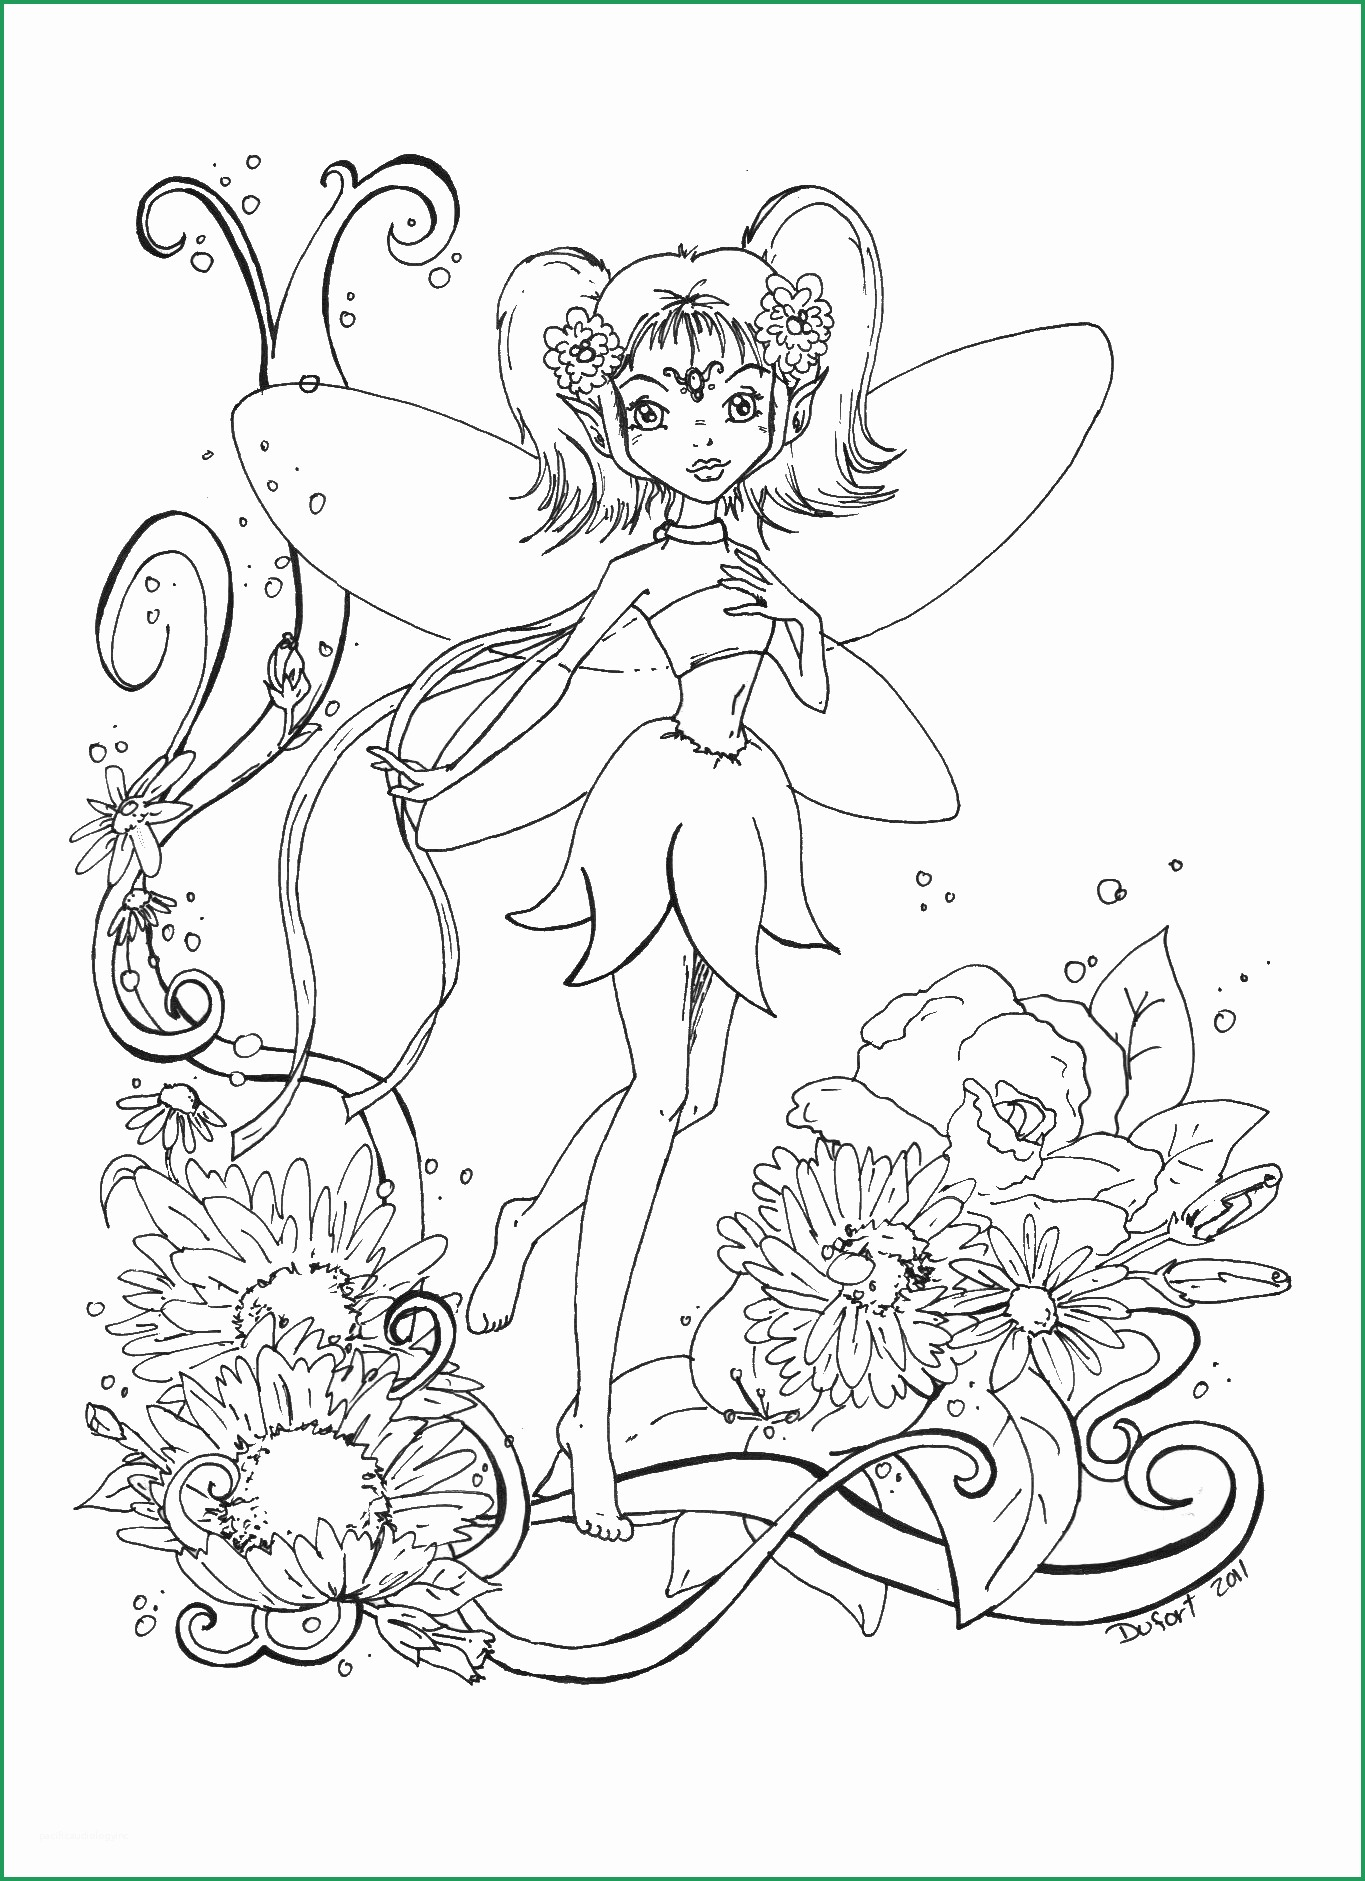 Free Printable Coloring Pages Fairies Adults Coloring Ideas Excelent Fairy Coloring Pages Fors Free Printable